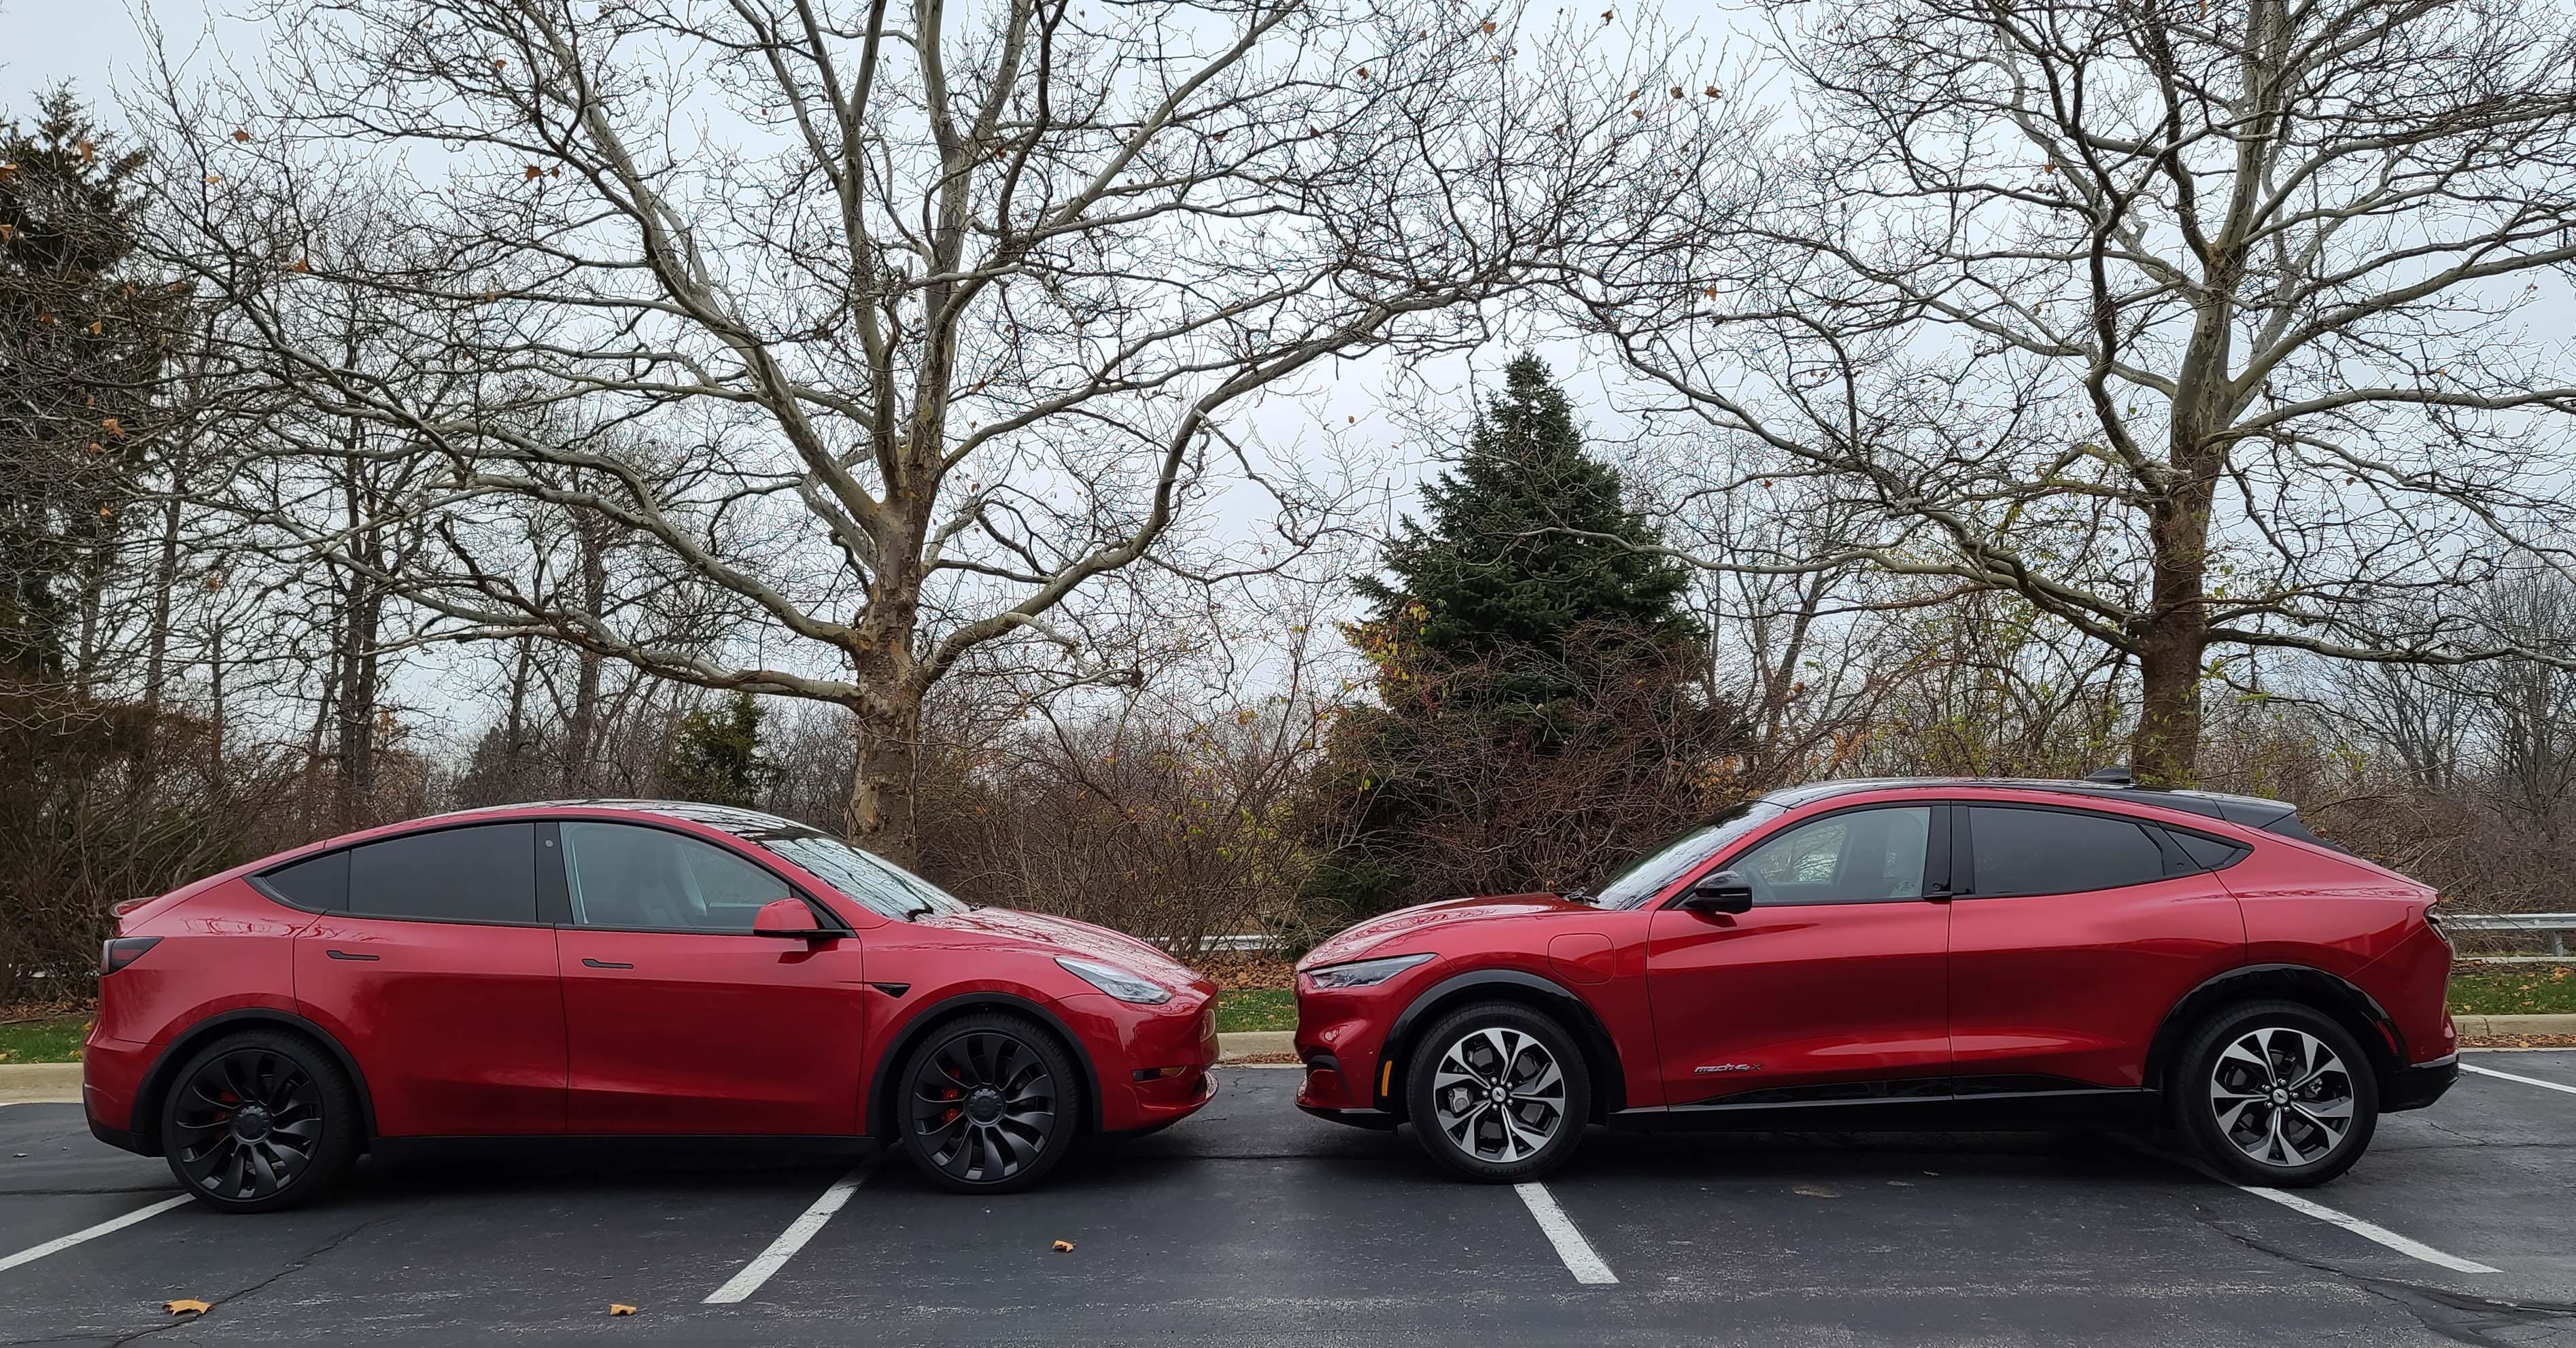 The 2021 Ford Mustang Mach-E (right) goes right at the Tesla Model Y. Tesla has dominated sales, but the Mach-E seeks to eat into its market share with a similar performance vibe, 300-mile range, and even a GT model.